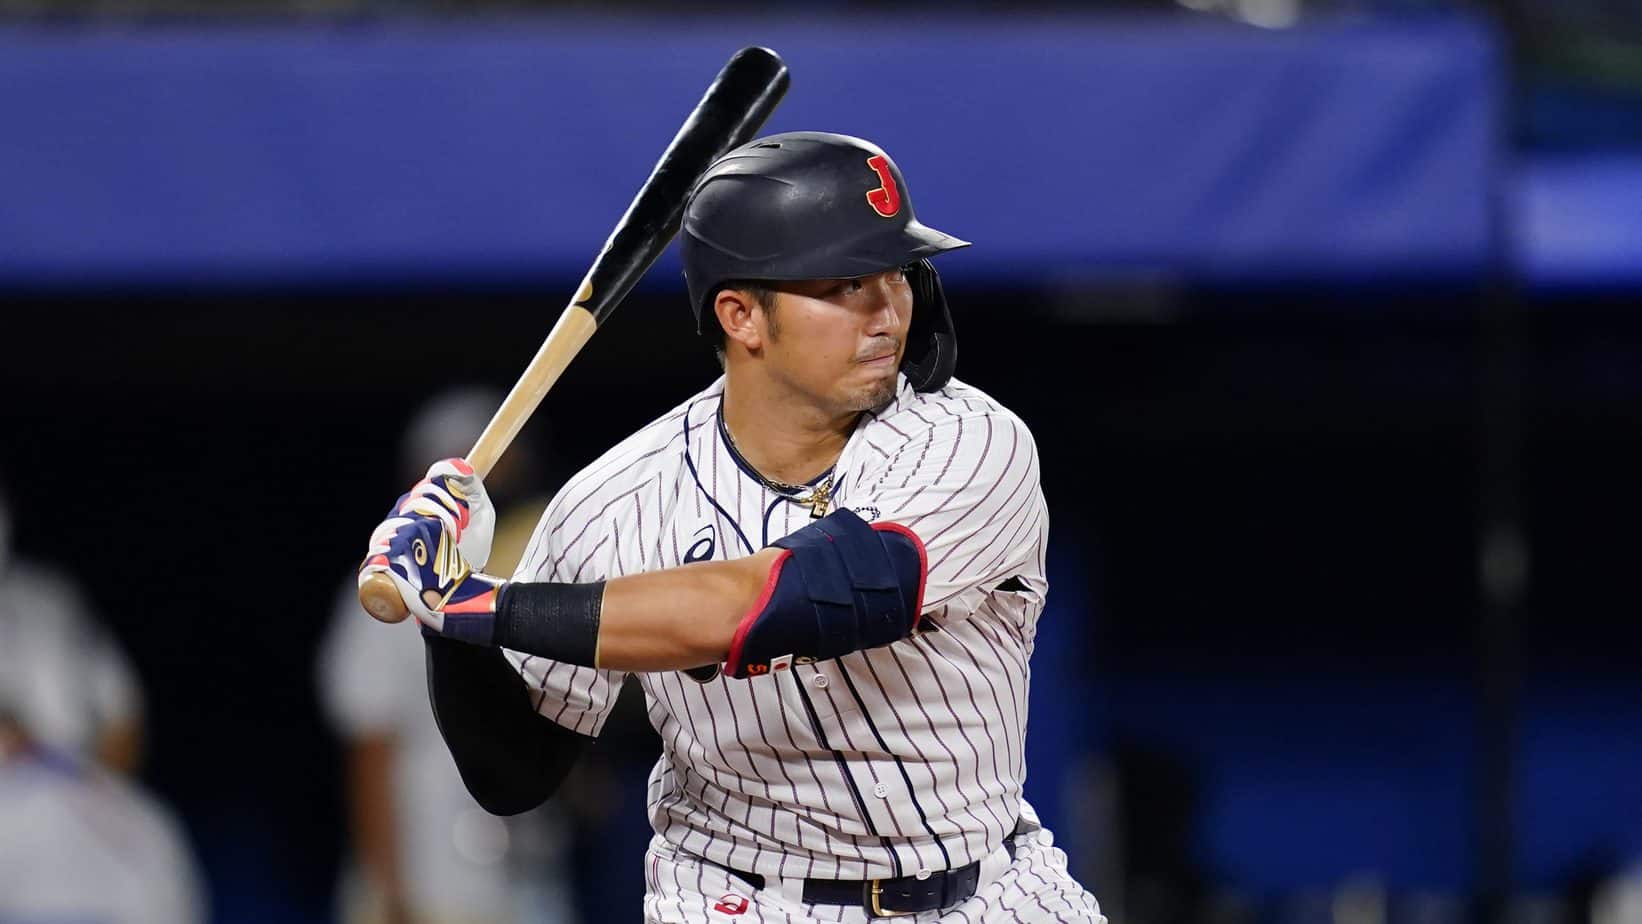 According to several different reports, prized Japanese outfielder Seiya Suzuki has plans to meet with the Cubs tonight amid Dodgers, Padres rumors